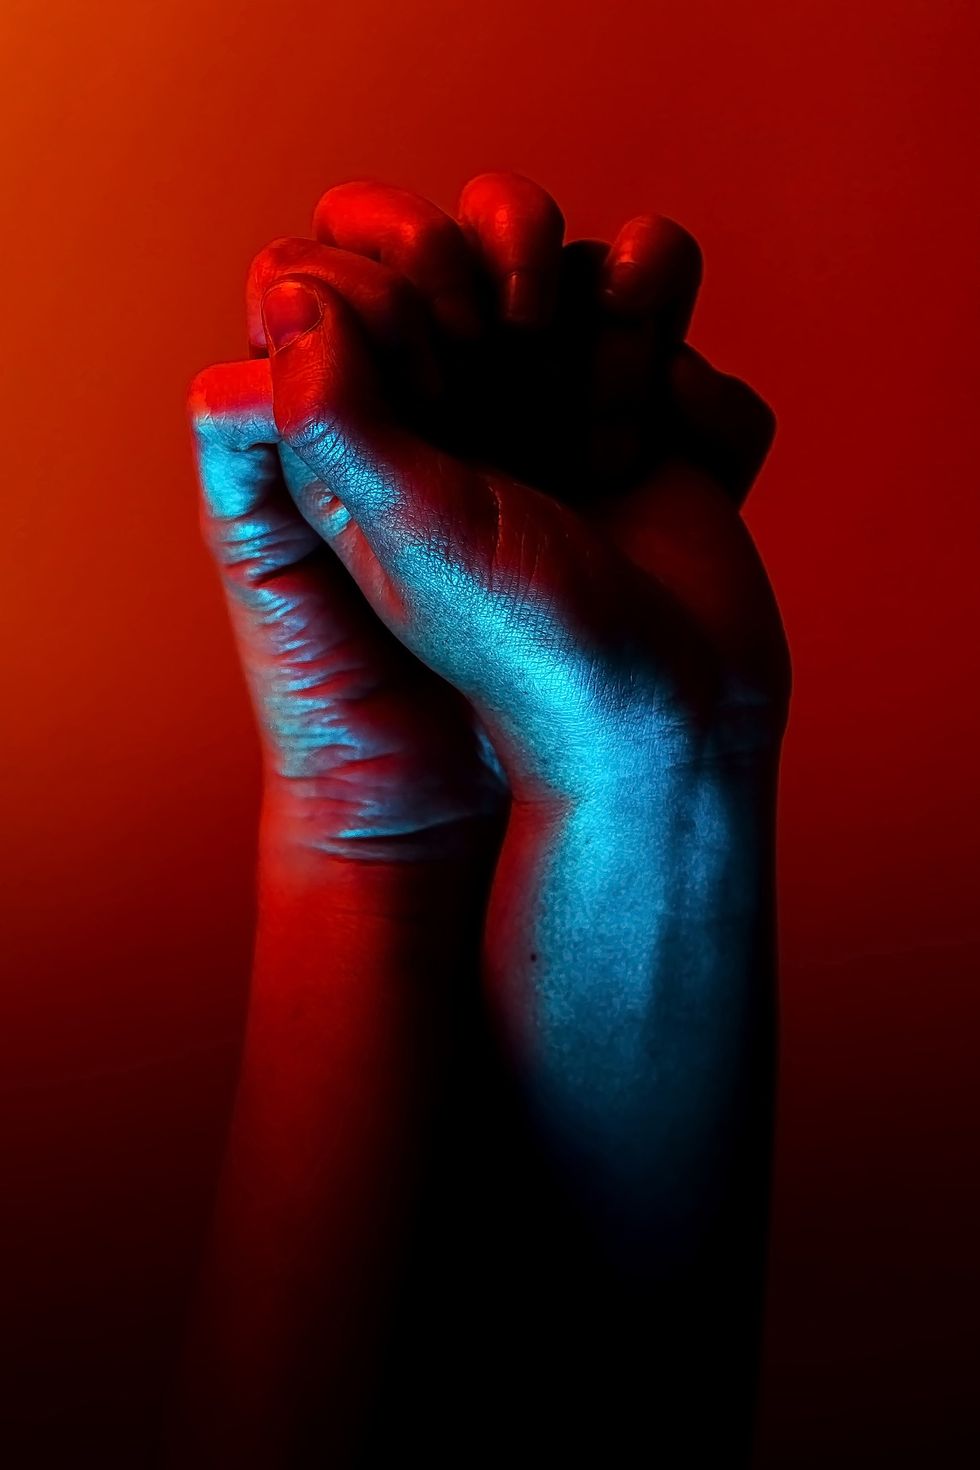 two people holding hands against a red background